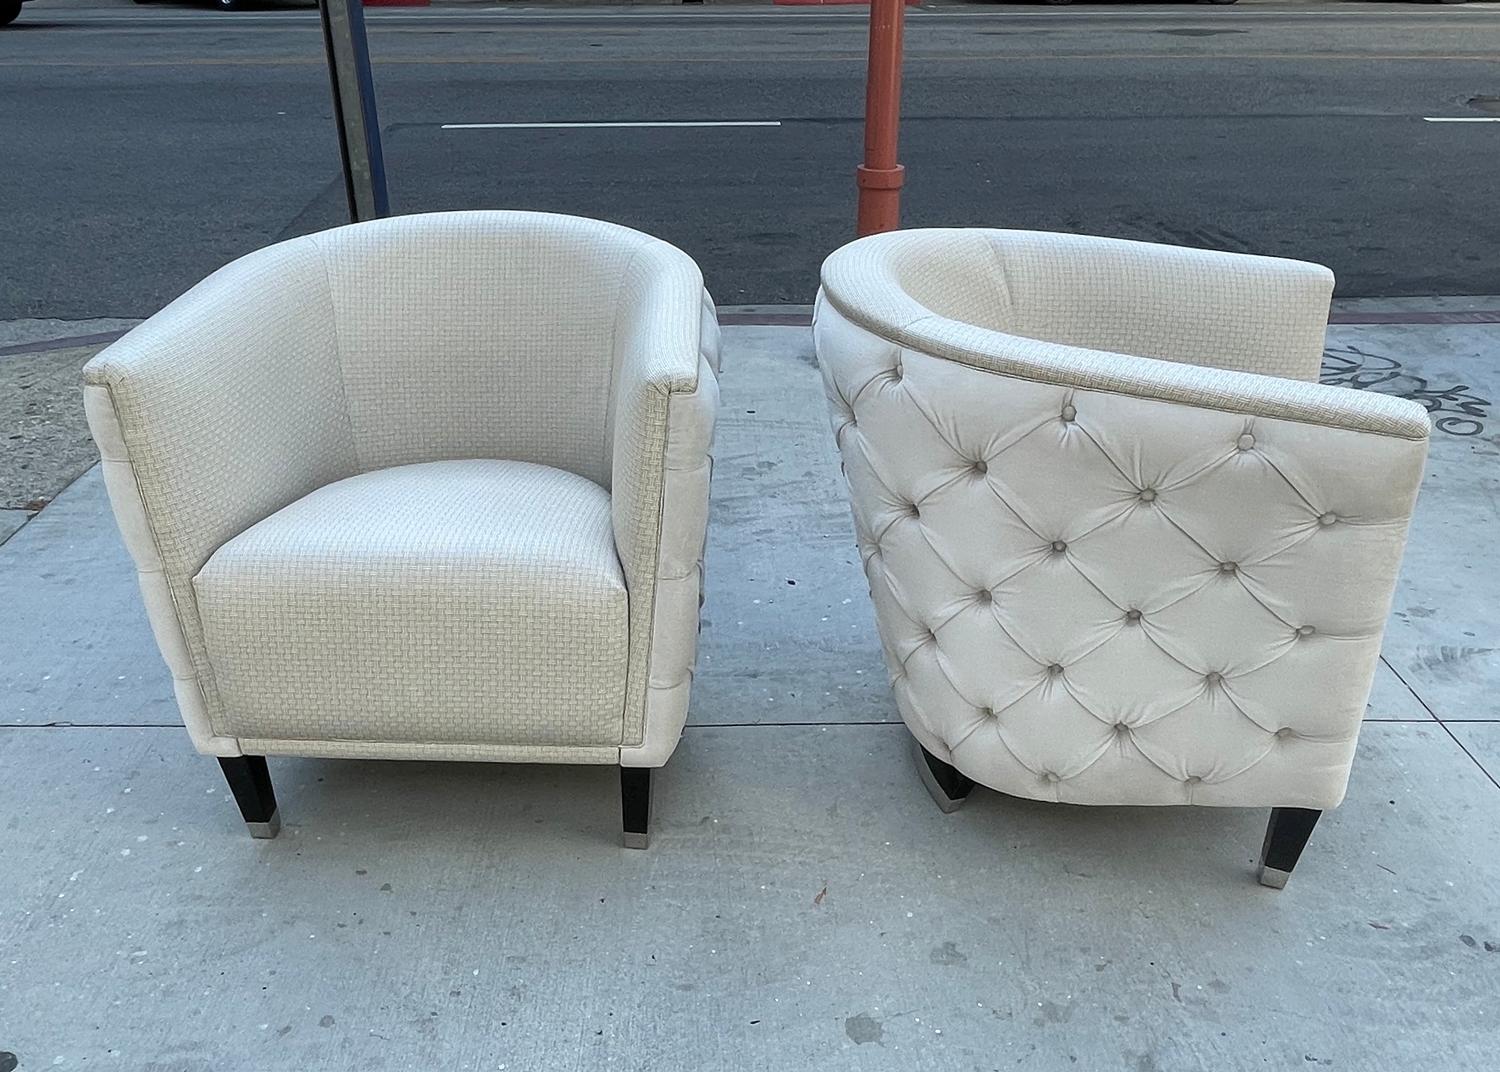 Introducing the Pair of Lounge Chairs with Tufted Backs by Luxury Living, the perfect addition to any indoor space. These chairs are designed to offer both comfort and style, making them ideal for relaxing on a warm summer day or enjoying a cool